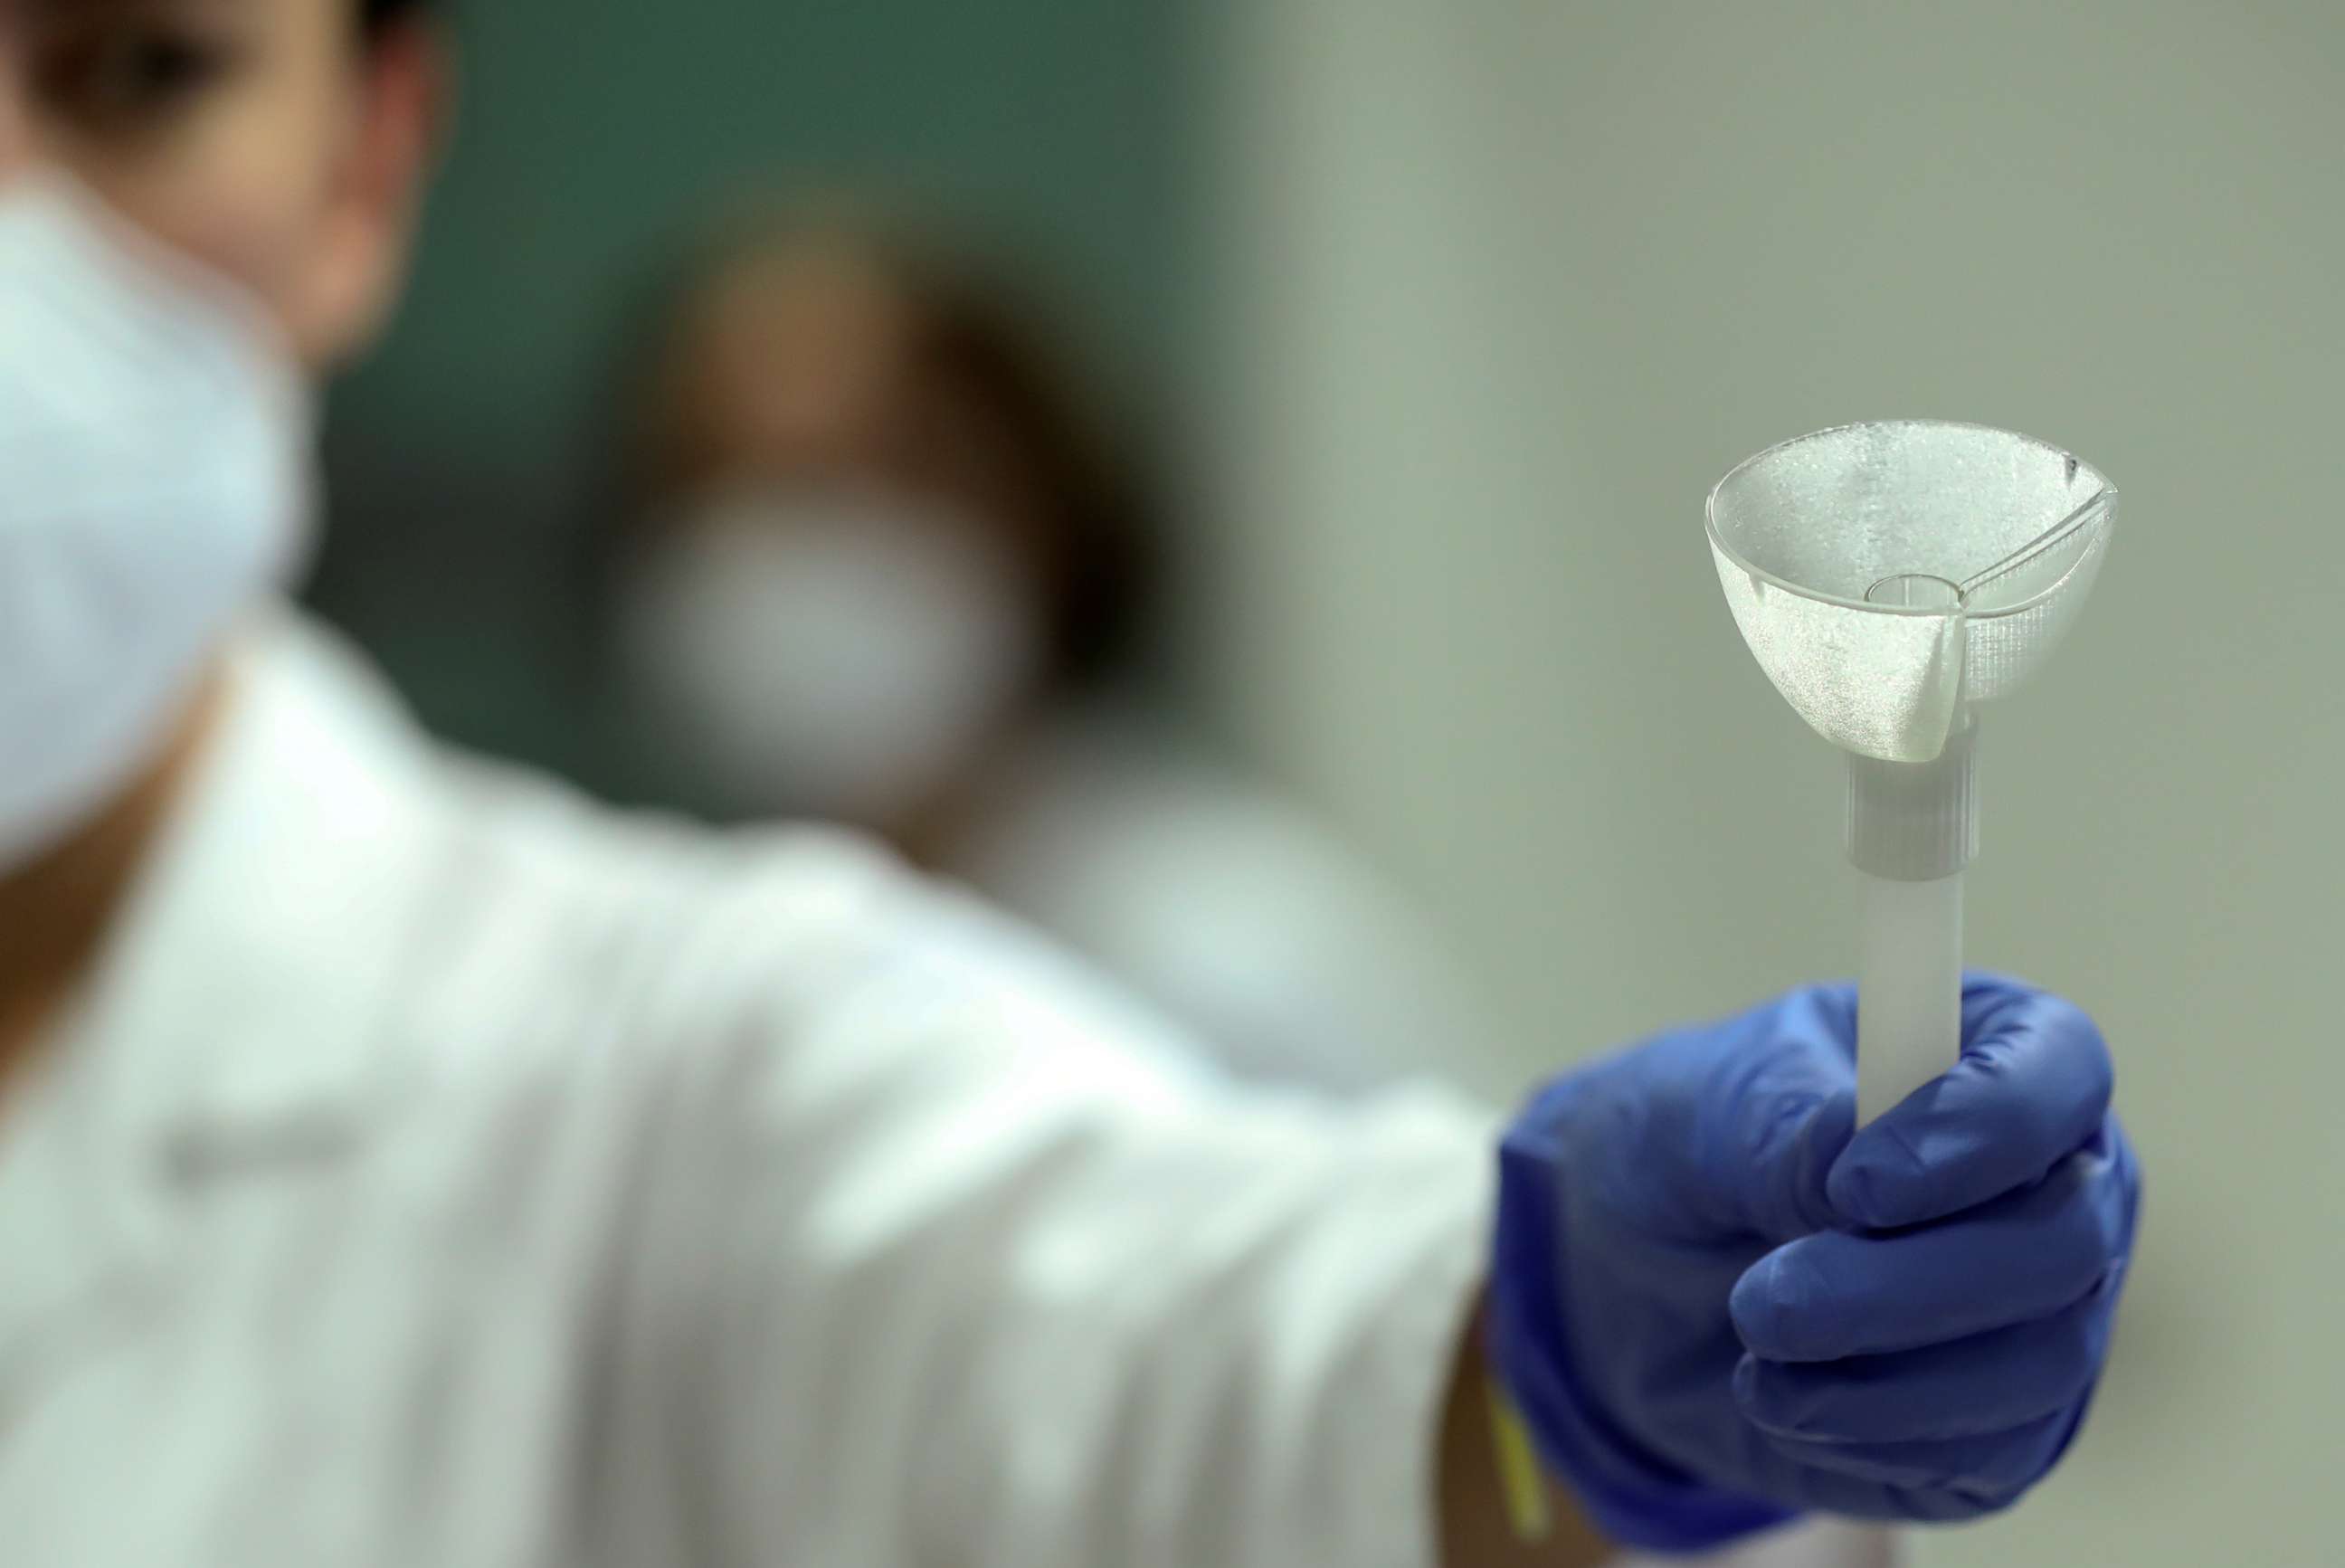 PHOTO: A laboratory worker shows a prototype of a self-test that will use saliva in a rapid COVID-19 test, which could replace more commonly used swabs, at the University of Liege in Belgium Aug. 12, 2020.